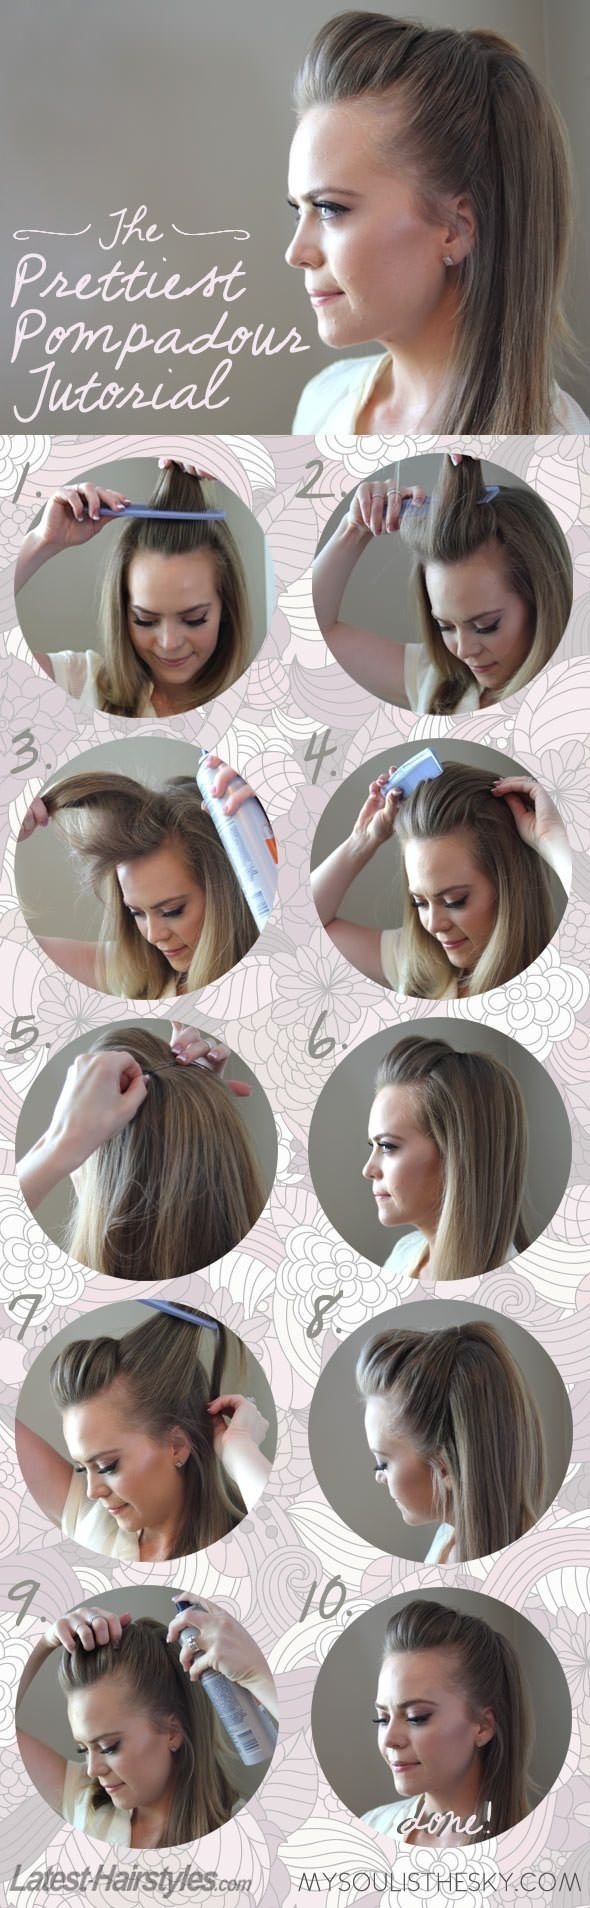 23 Gorgeous Hairstyle Ideas and Tutorials that can be done in 10 minutes  (10)